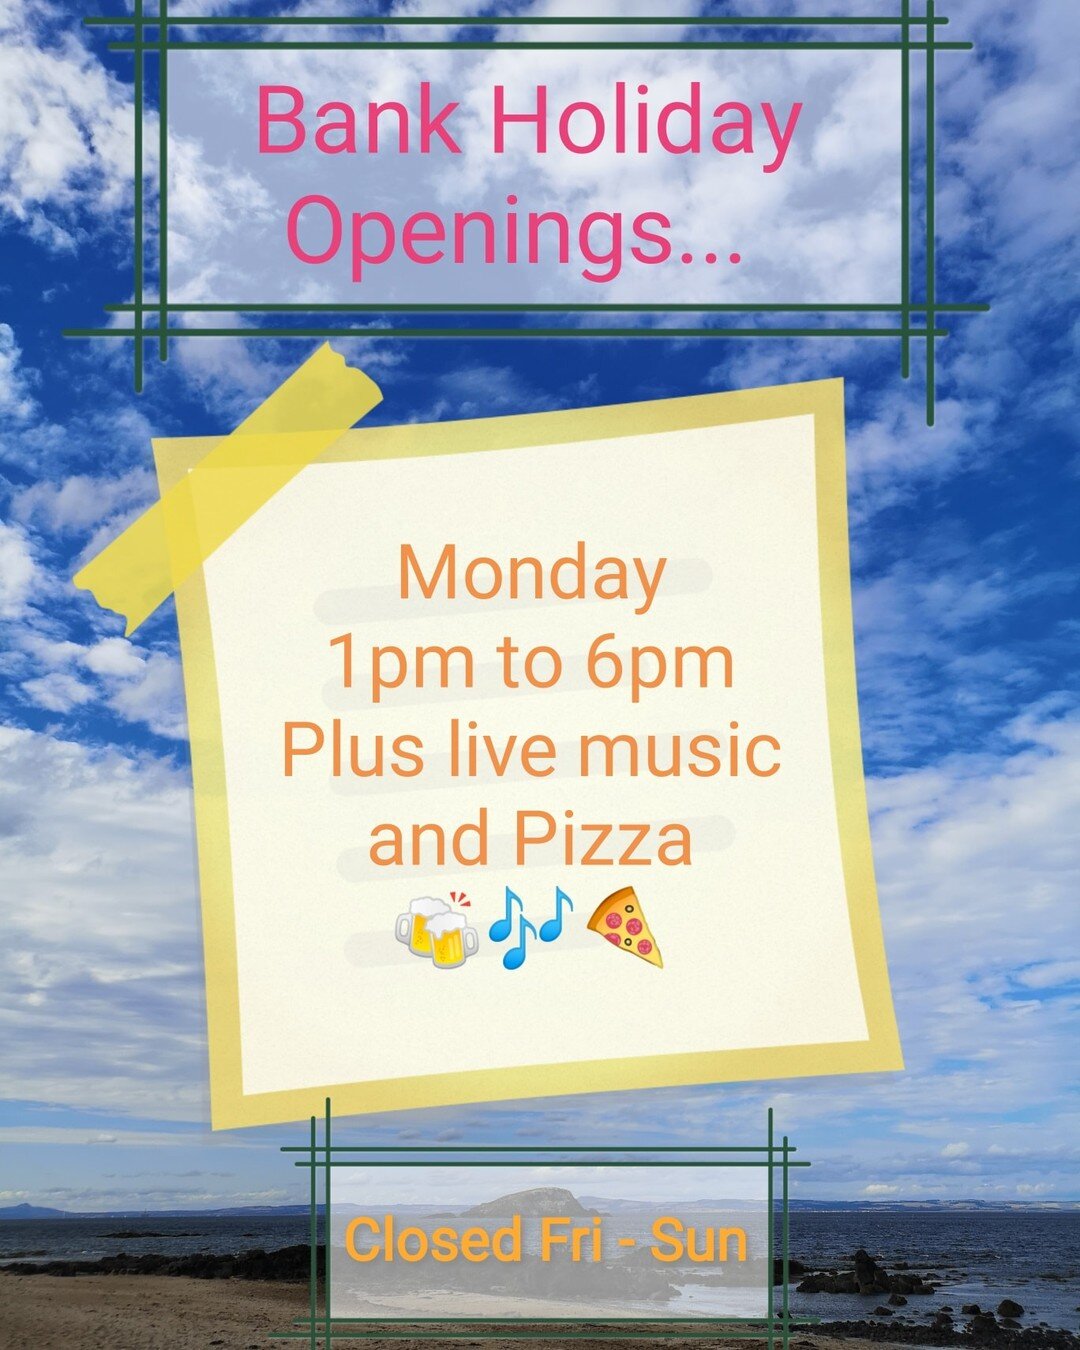 Only open on Monday over the August Bank Holiday.

Plus live music from Lizzie B and Steel River Pizza.

#guisbrew #localbeer #rocksteady #steelriverpizzavan #steelriverstreetfood #bankholidaymonday #whattodoinguisborough